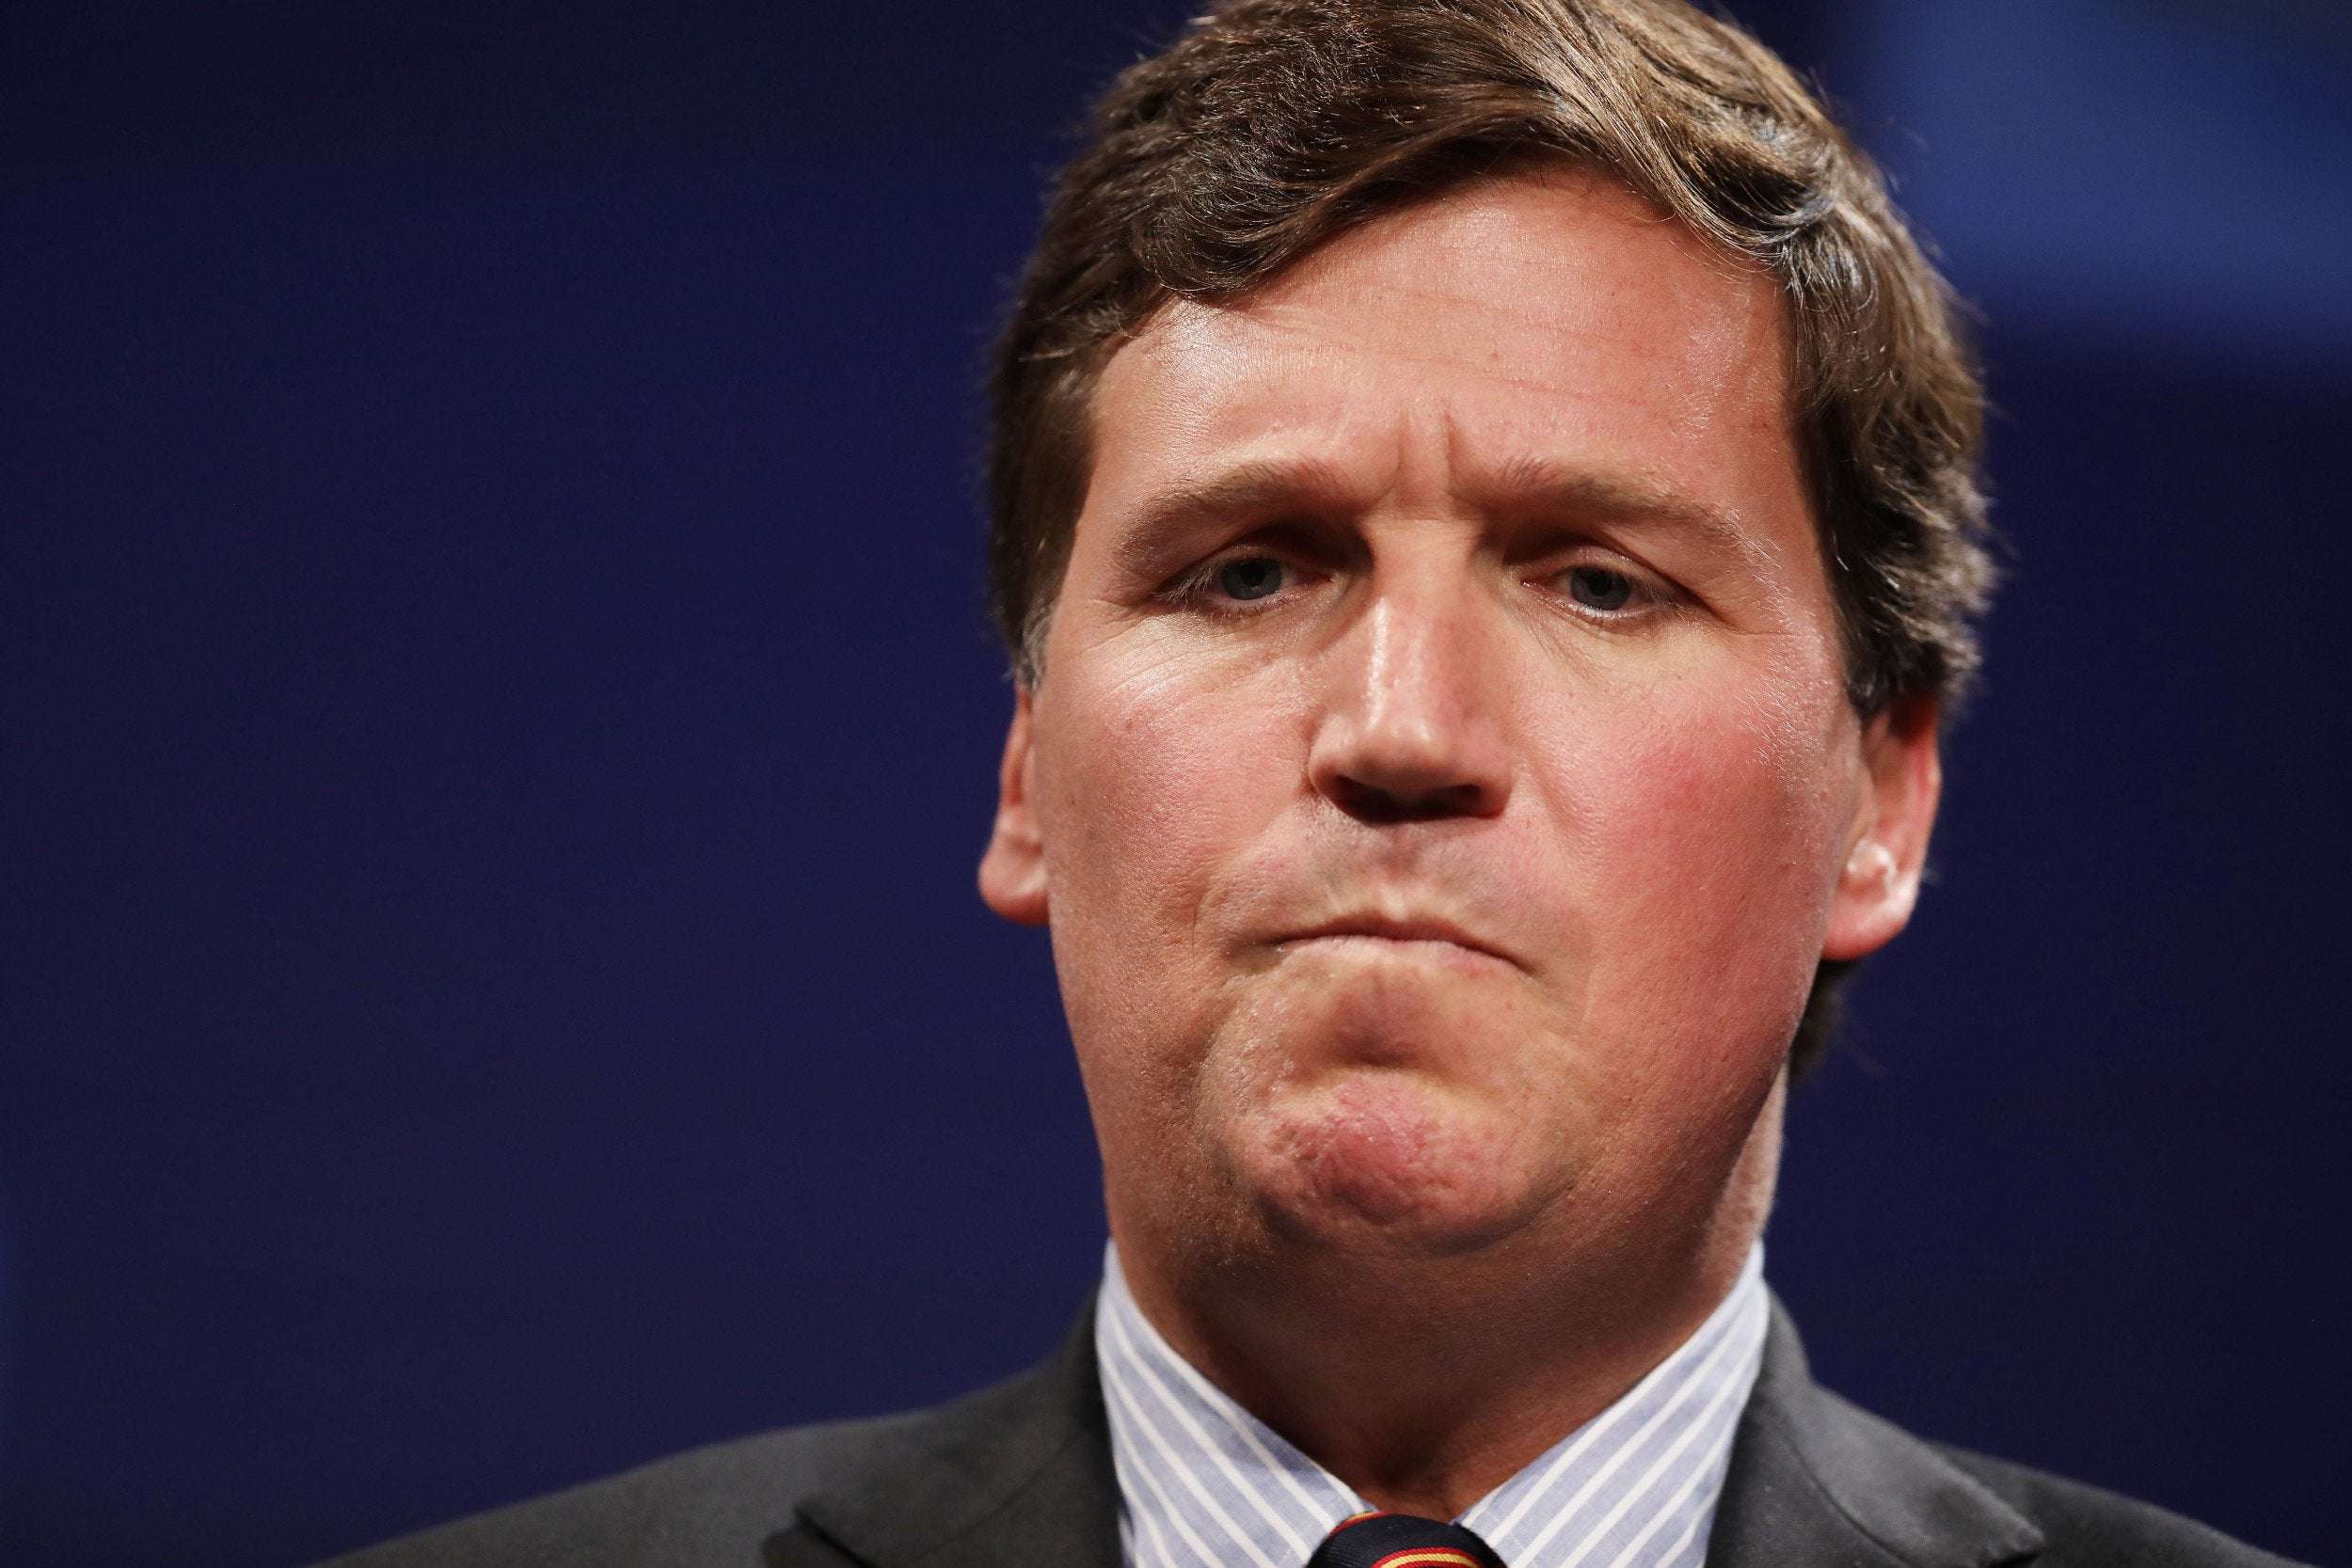 image for Tucker Carlson Says There's Not Enough Fraud to Change Election Results: 'We Should Be Honest'